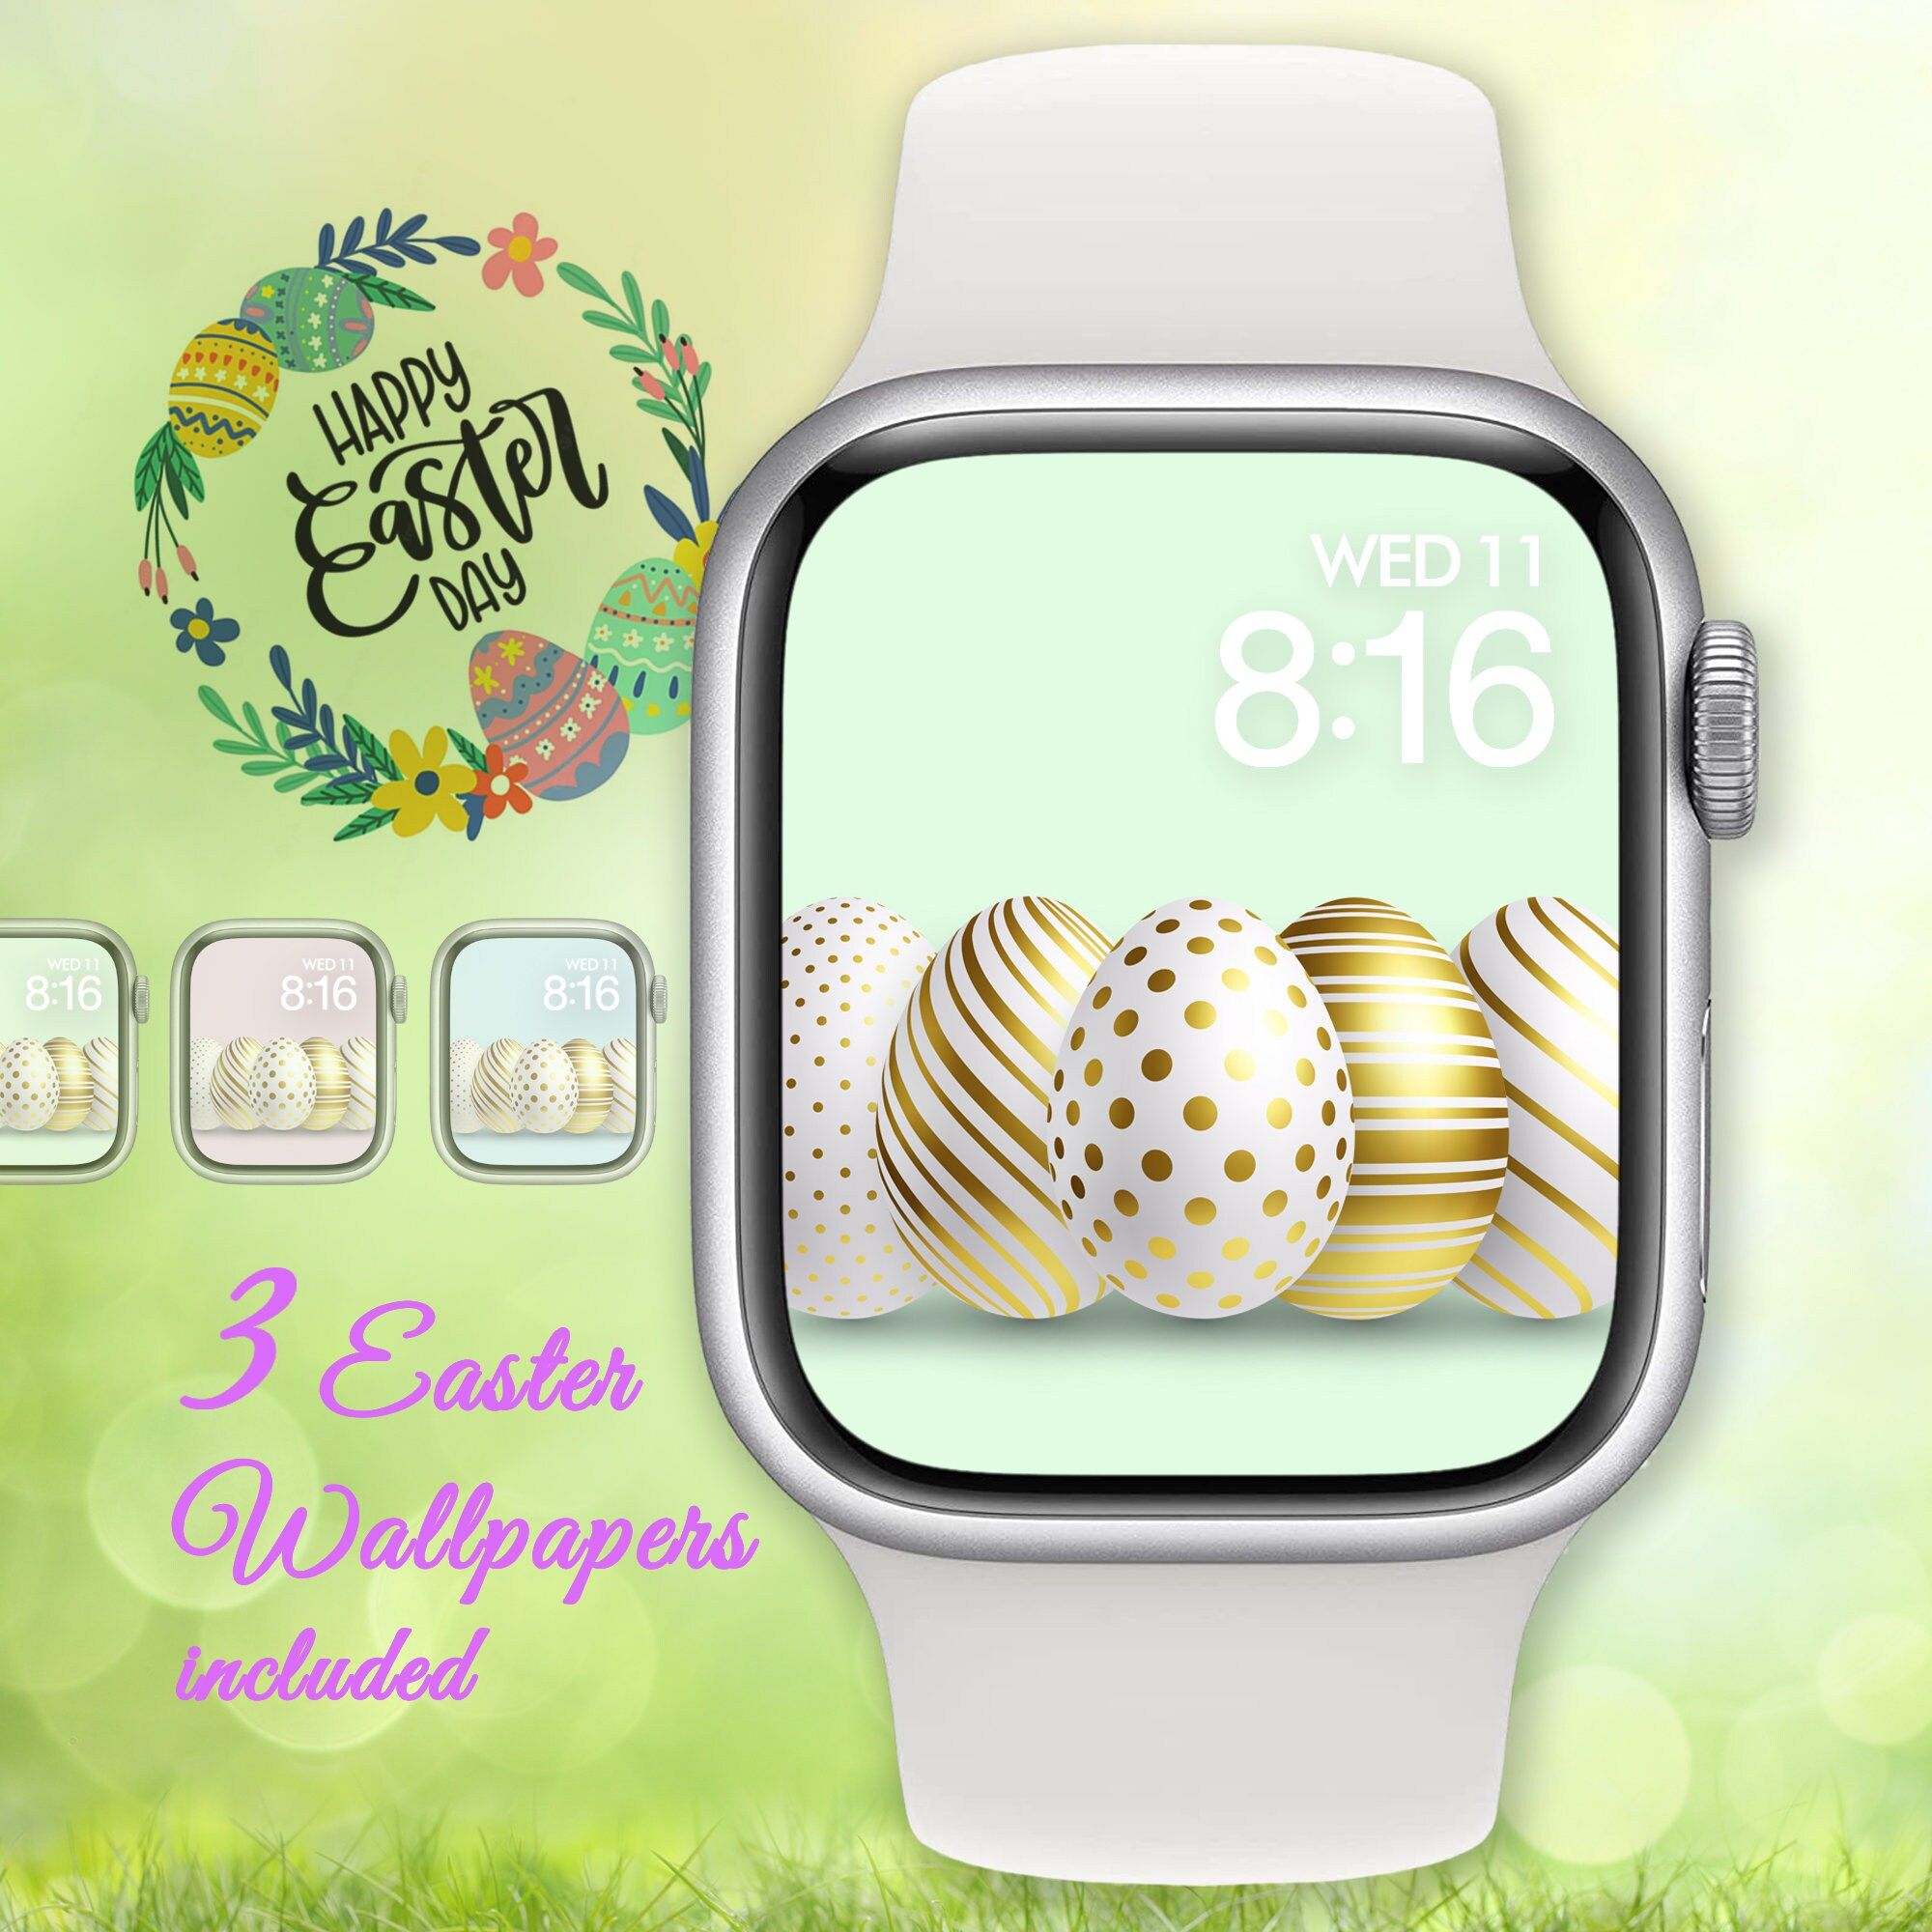 Easter Eggs Apple Watch Wallpaper. Easter Eggs Apple Watch Wallpaper is a great way to celebrate Easter. This wallpaper is perfect for your Apple Watch. Get it now and enjoy the Easter spirit. - Easter